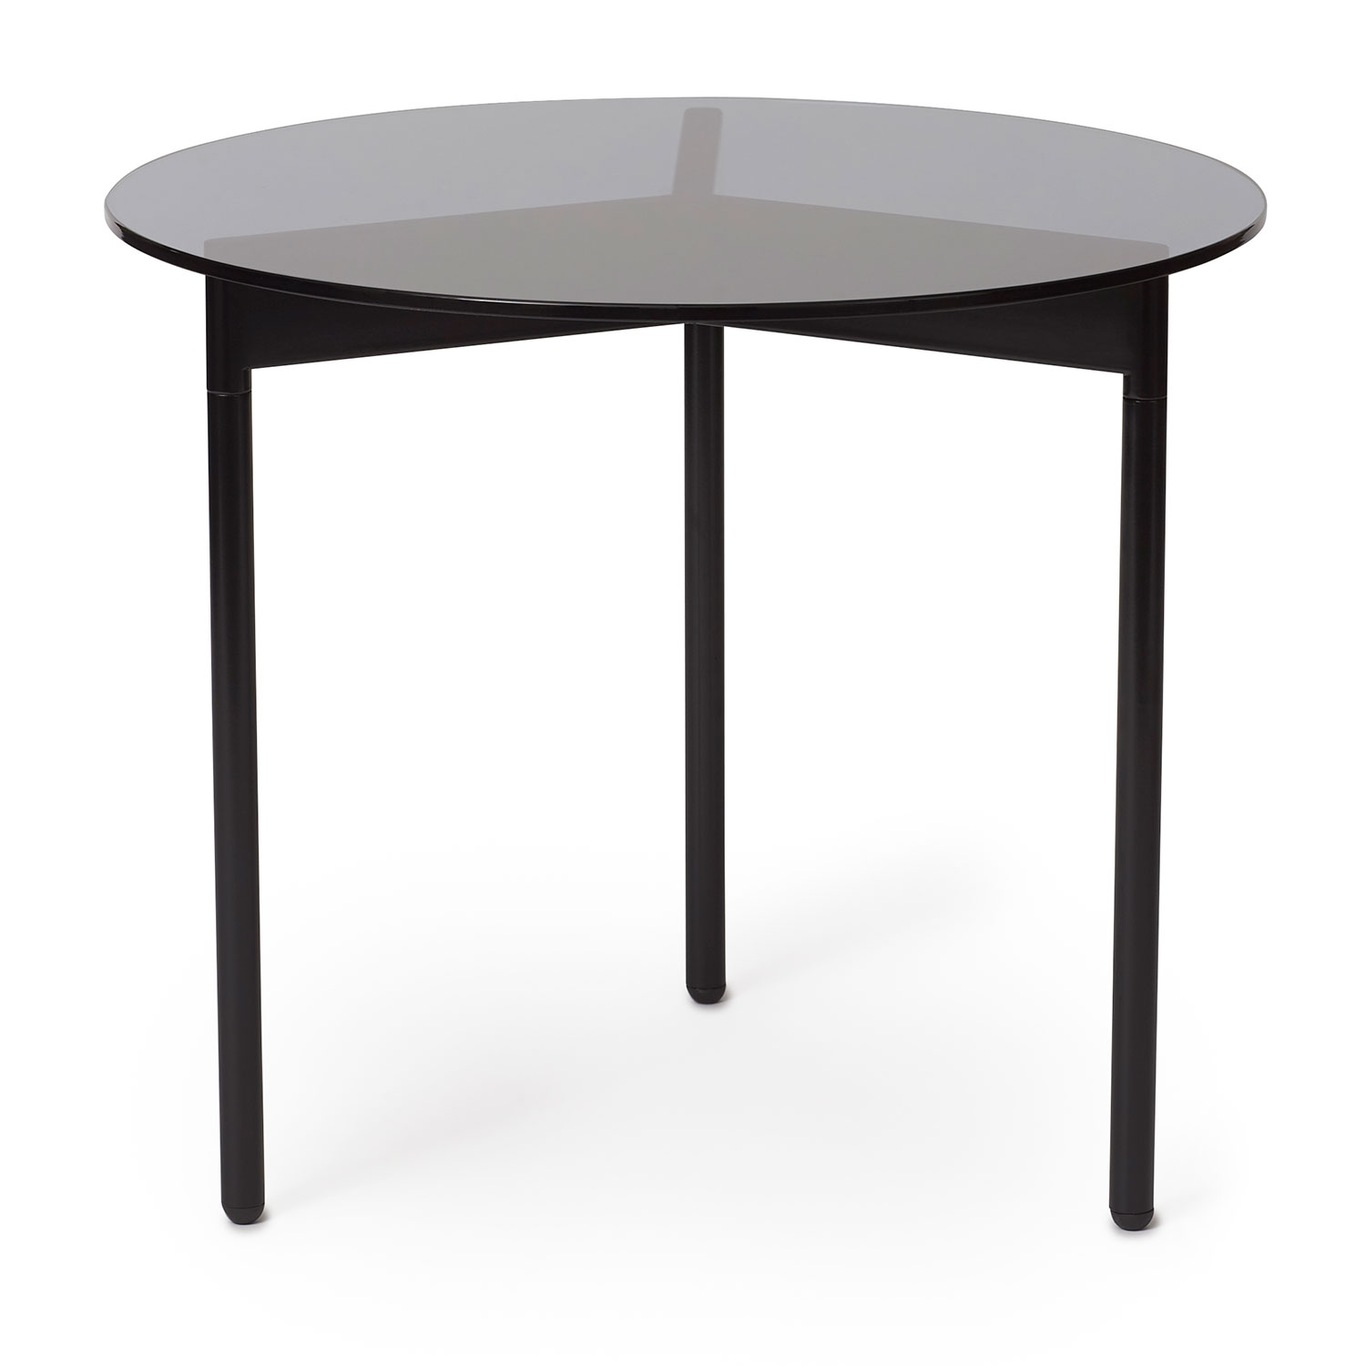 From Above Coffee Table 52 cm, Smoke Grey / Black Noir